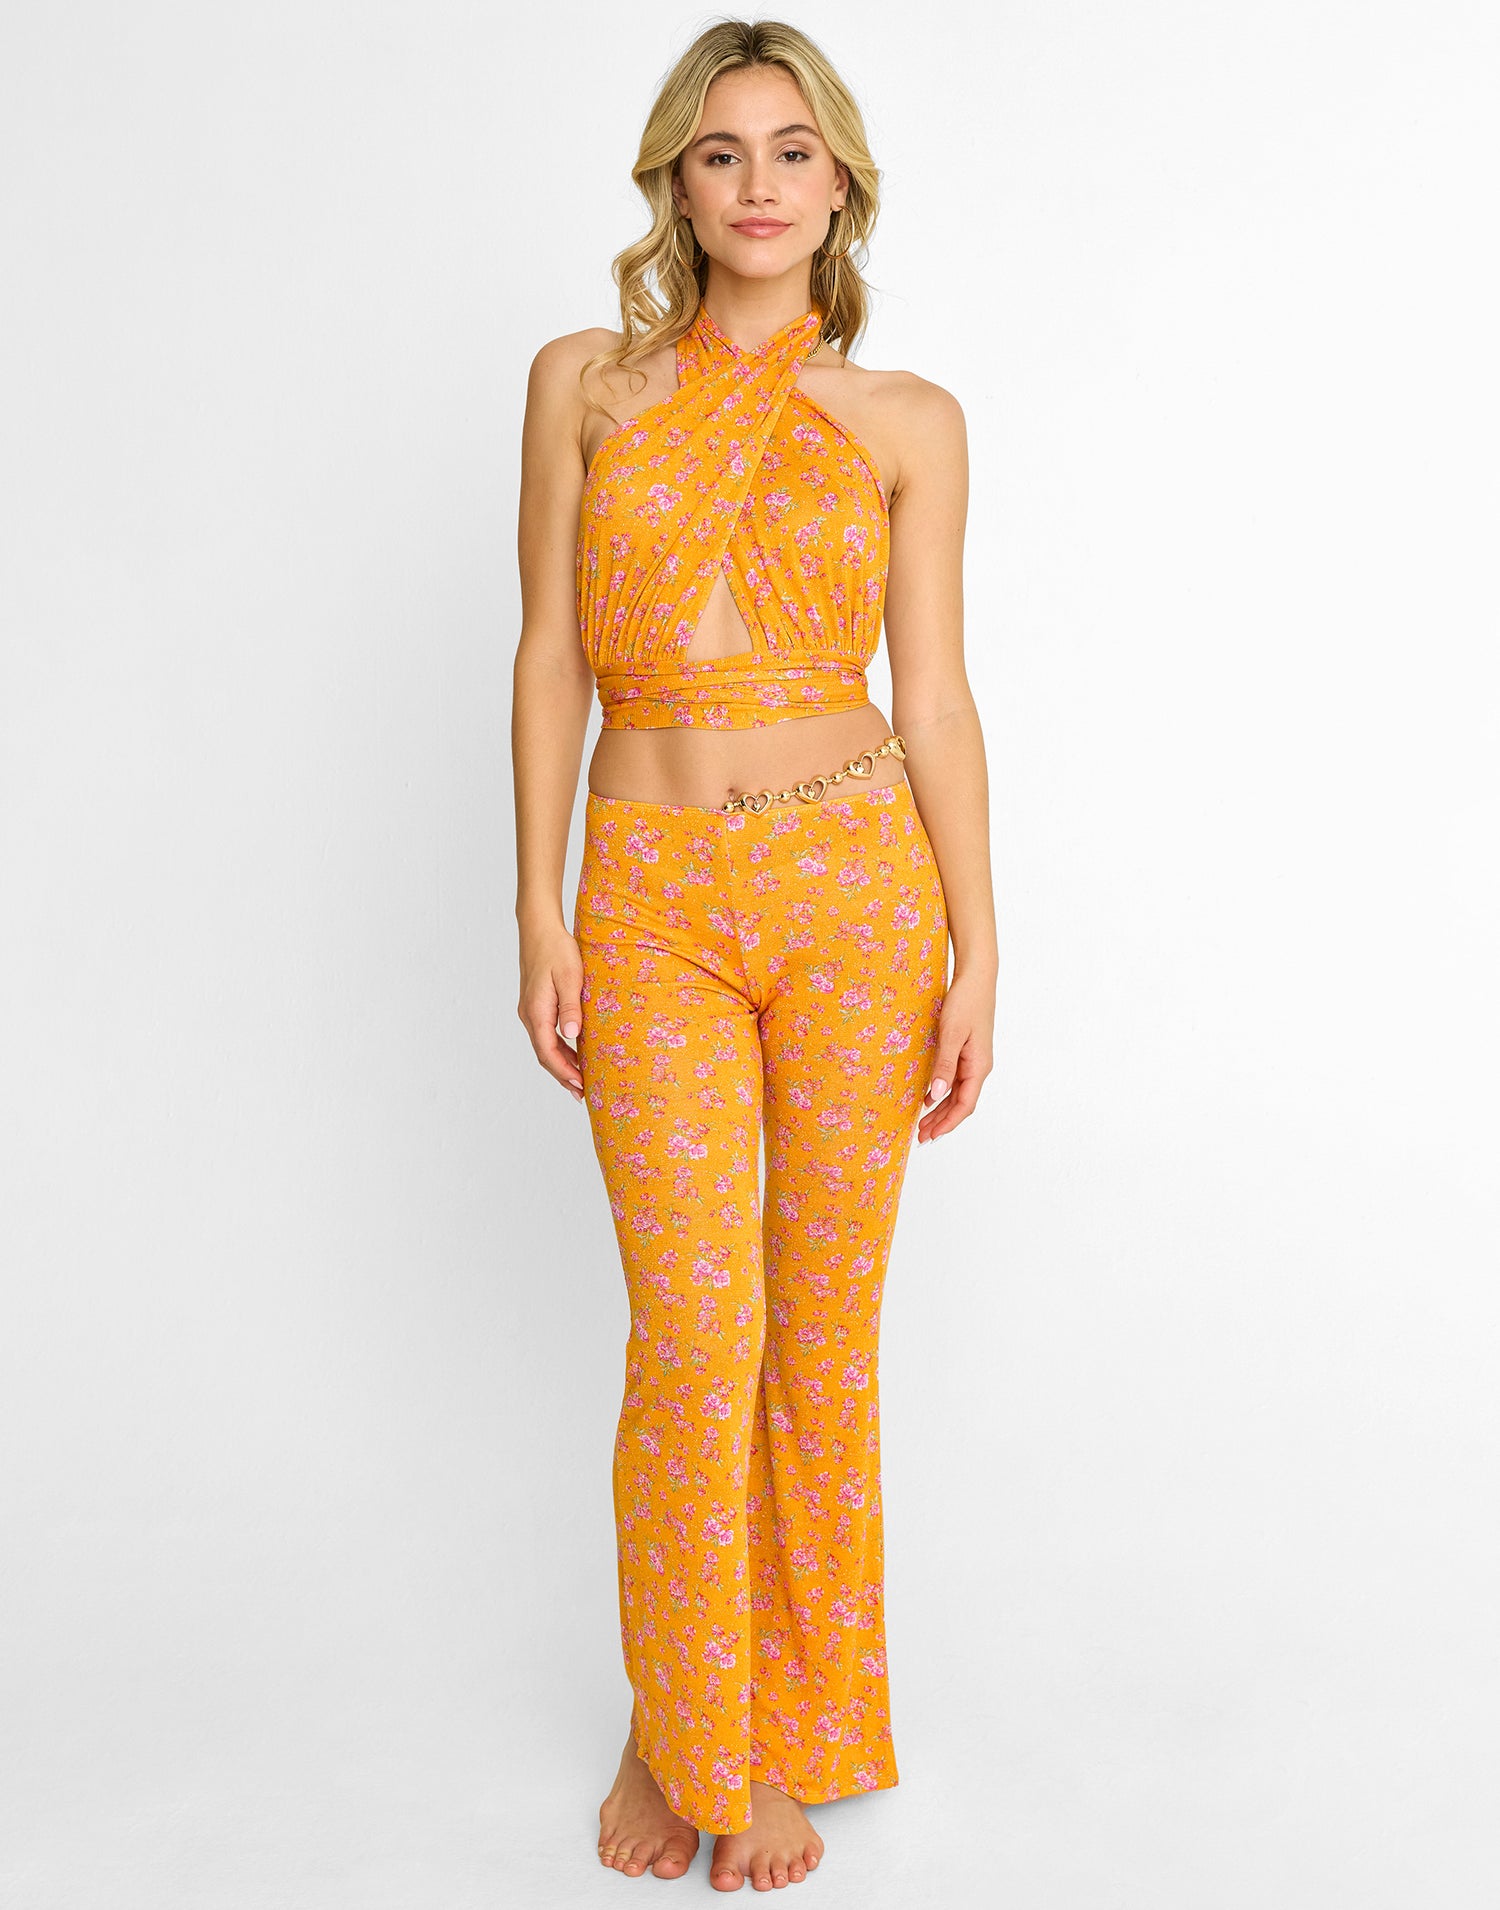 Saddie Mesh Wrap Top Cover Up in Orange Ditsy Floral - Front View